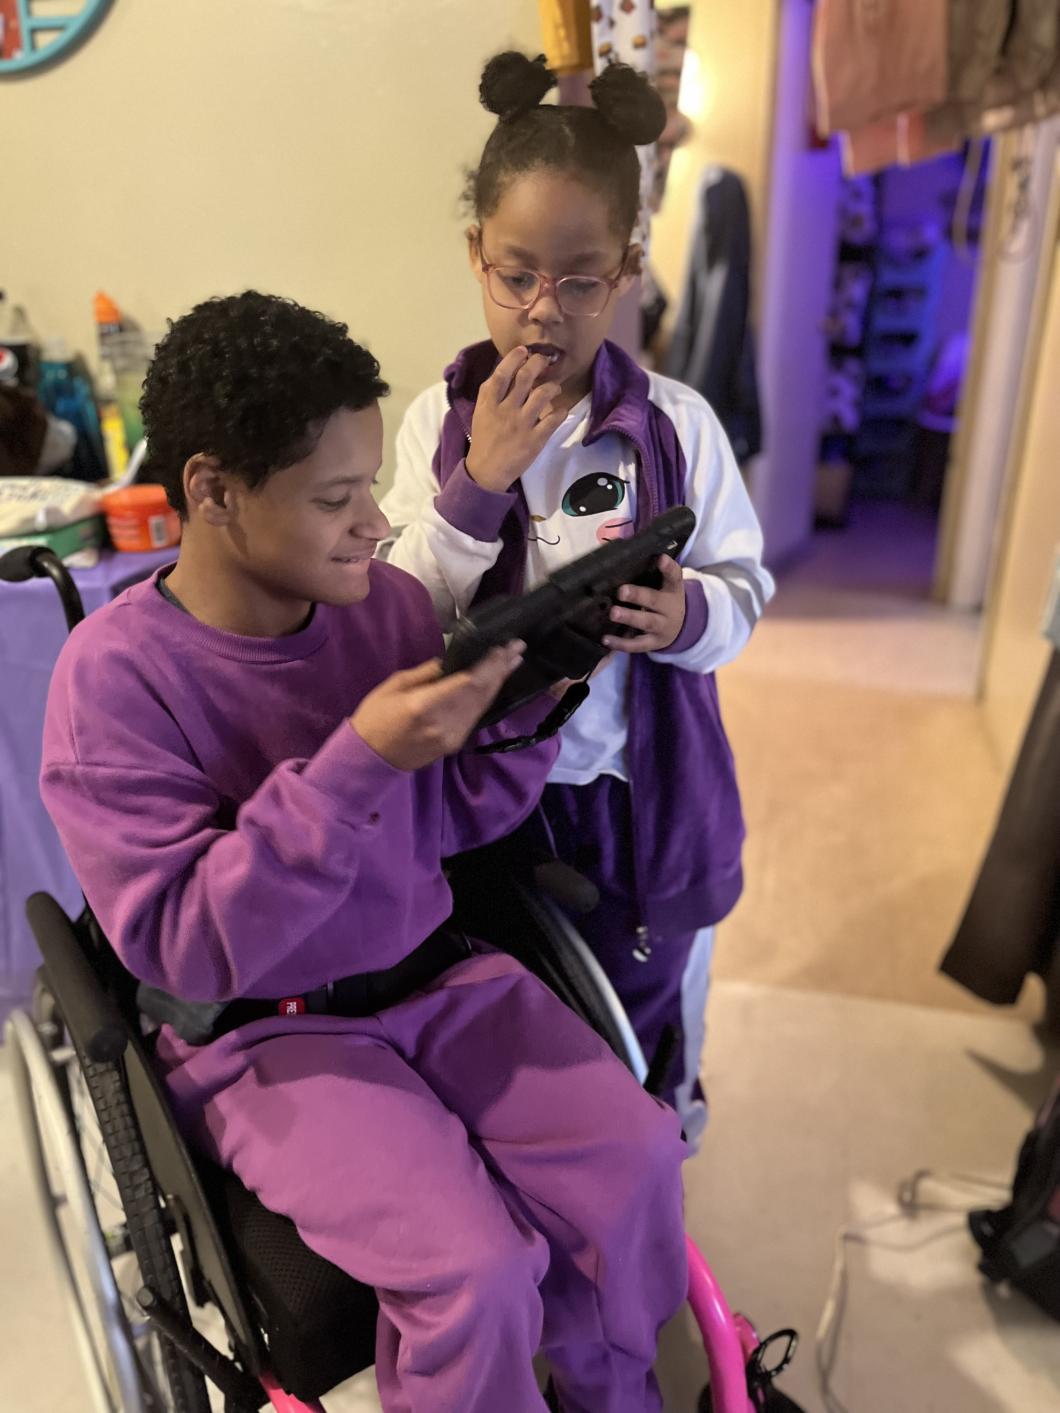 Mia (left) is in a wheelchair and holds an iPad, her sister (right) stands behind and to the side of her